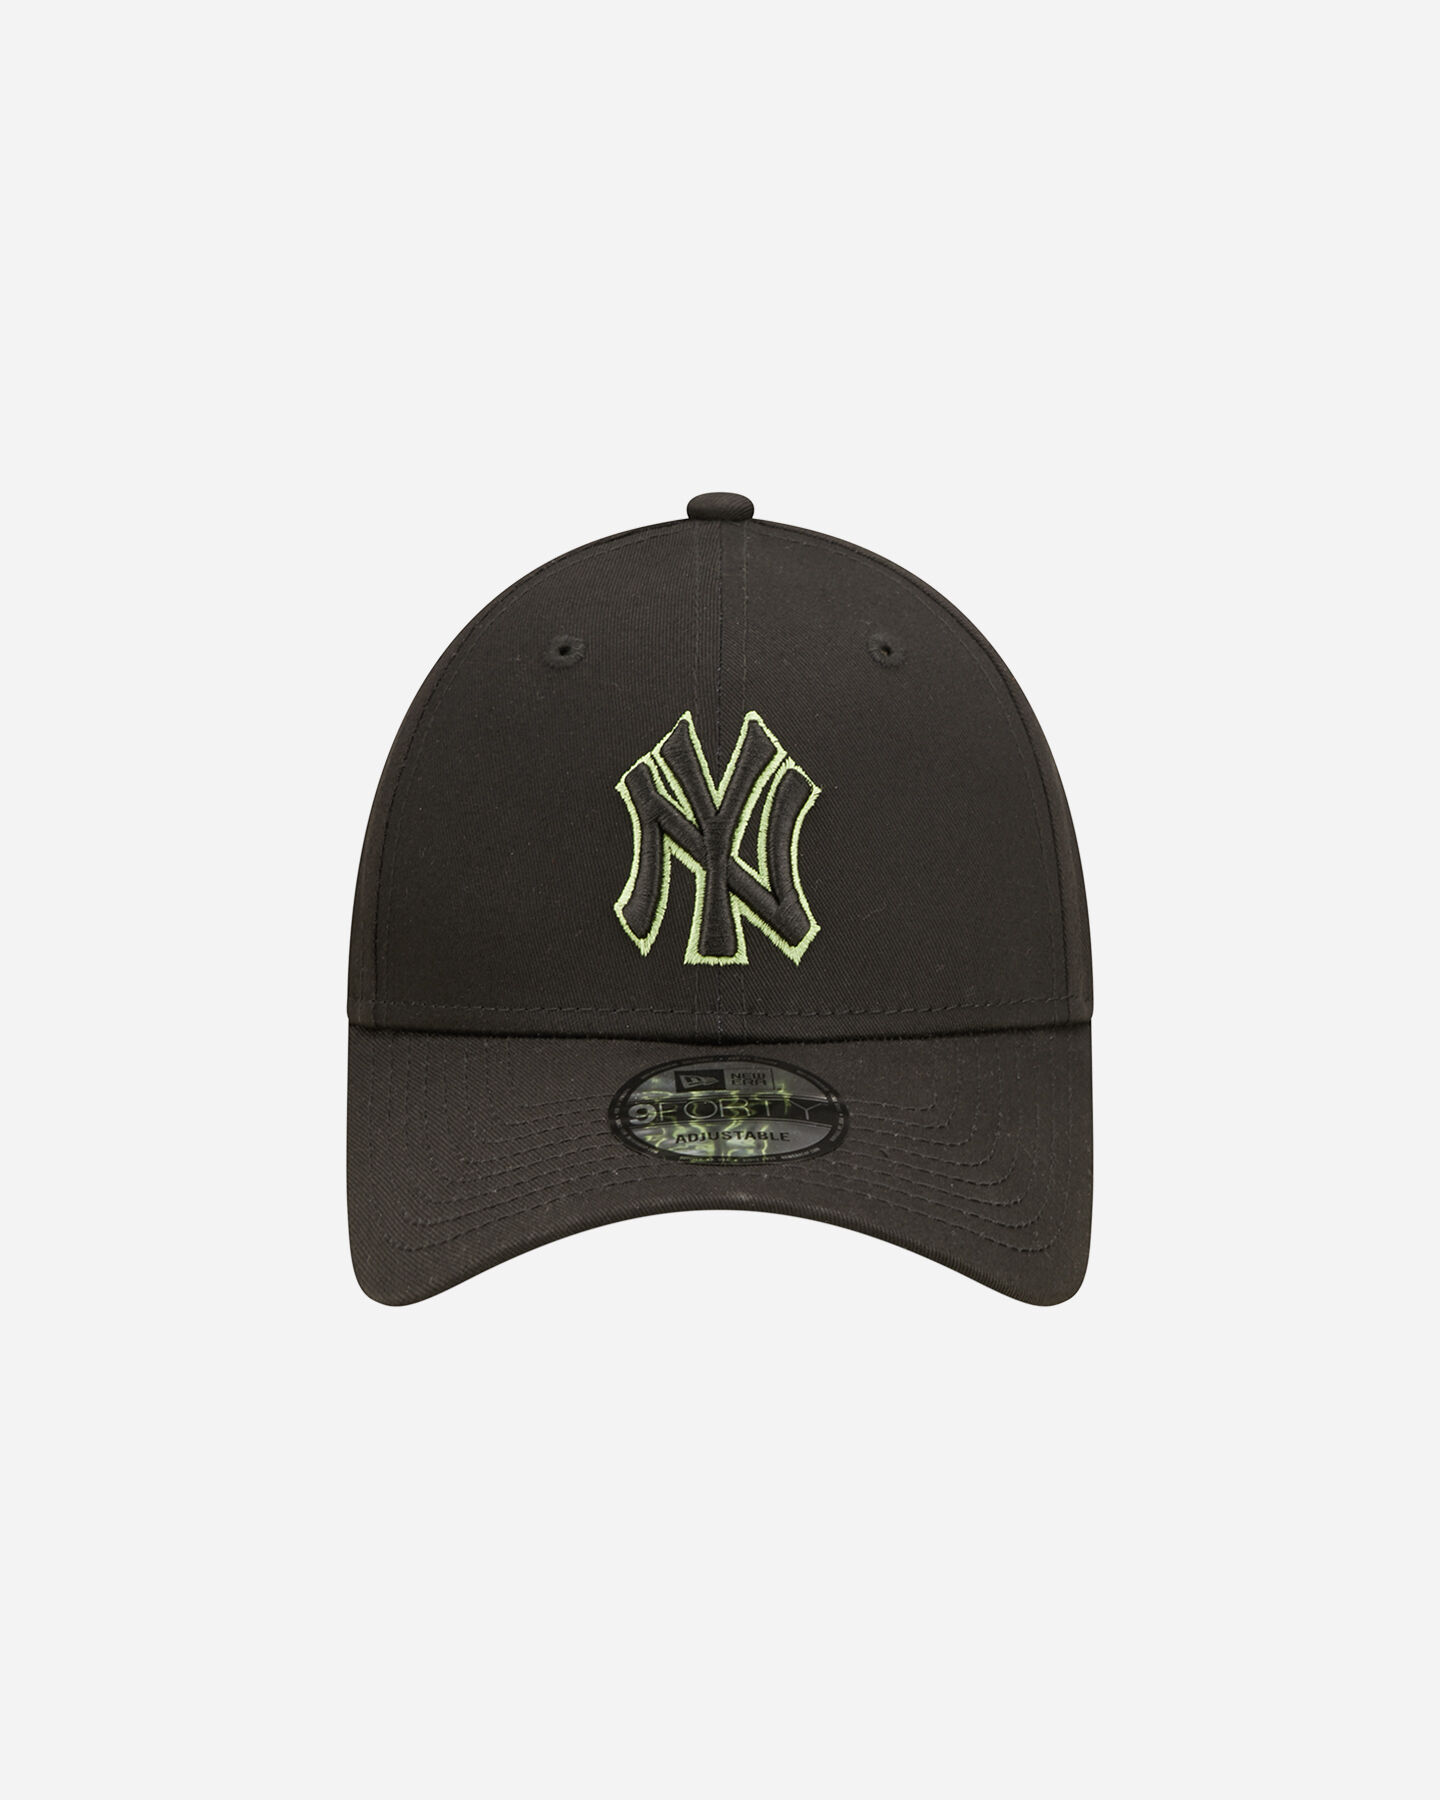  Cappellino NEW ERA 9FORTY TEAM OUTLINE NY YANKEES  S5546166|001|OSFM scatto 1